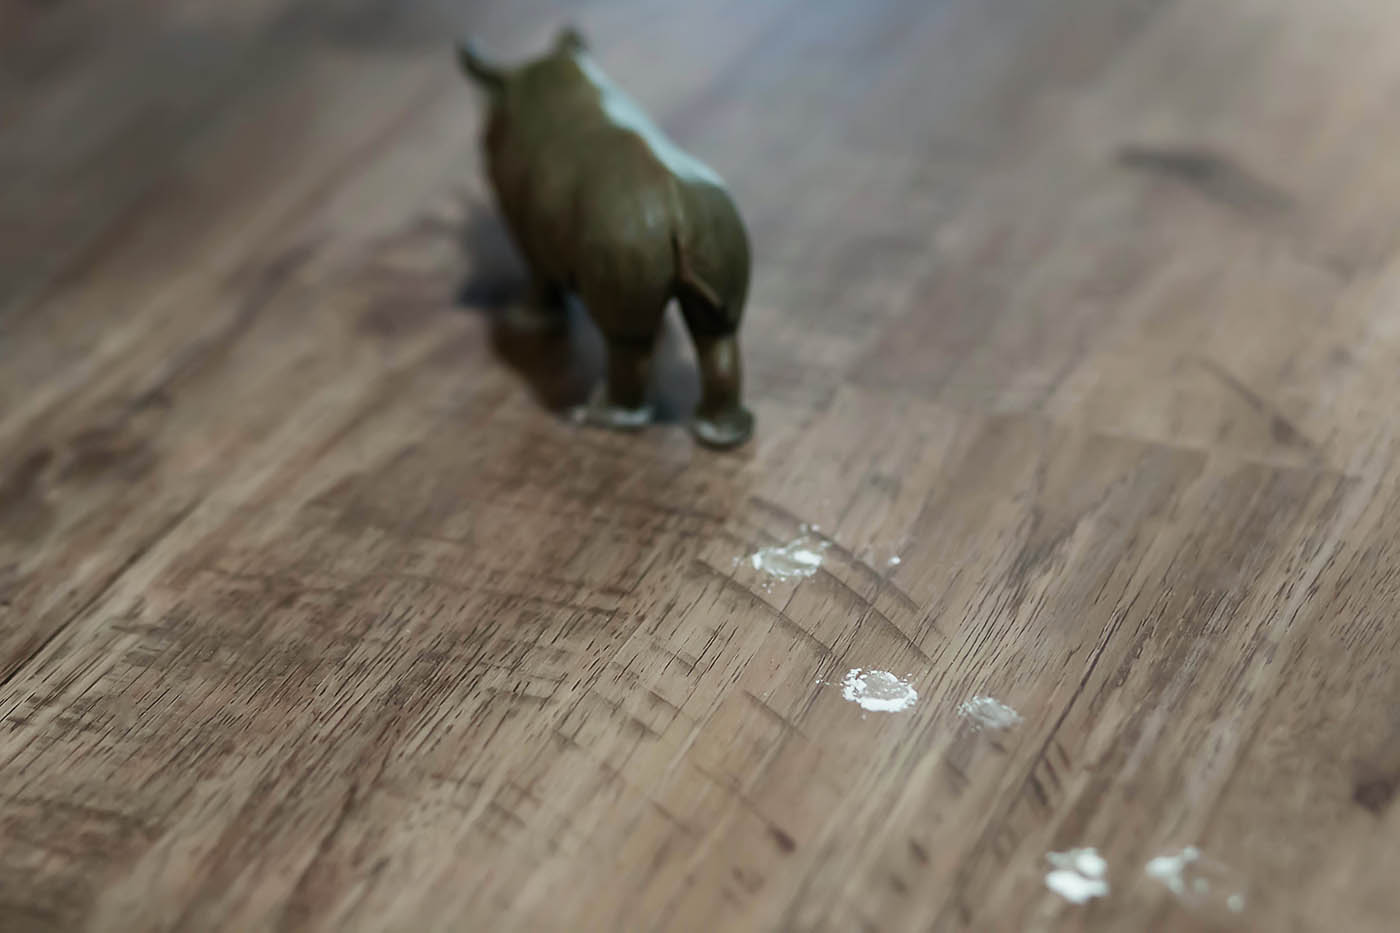 Hide and seek animals while tracking footprints